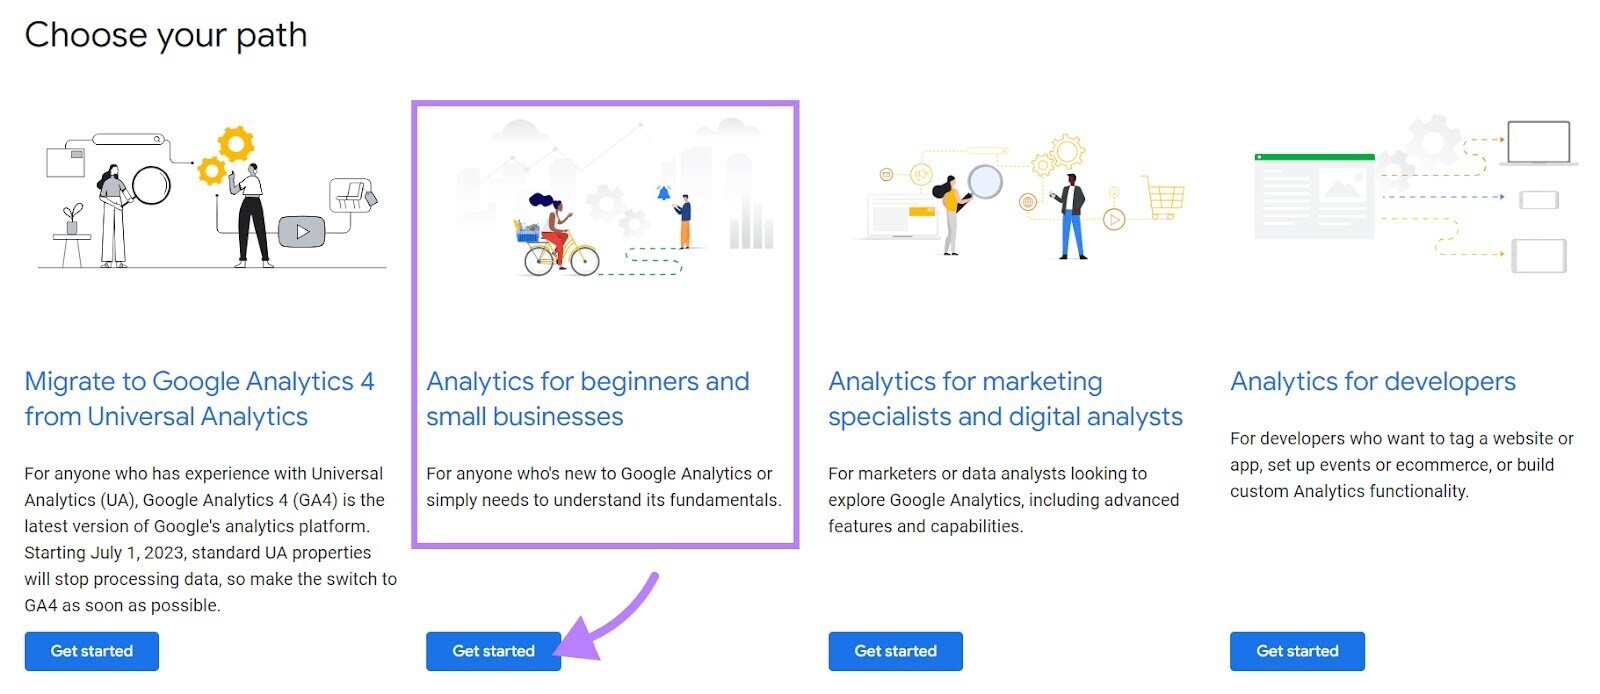 Google tutorials page with “Analytics for beginners and small businesses” tutorial highlighted